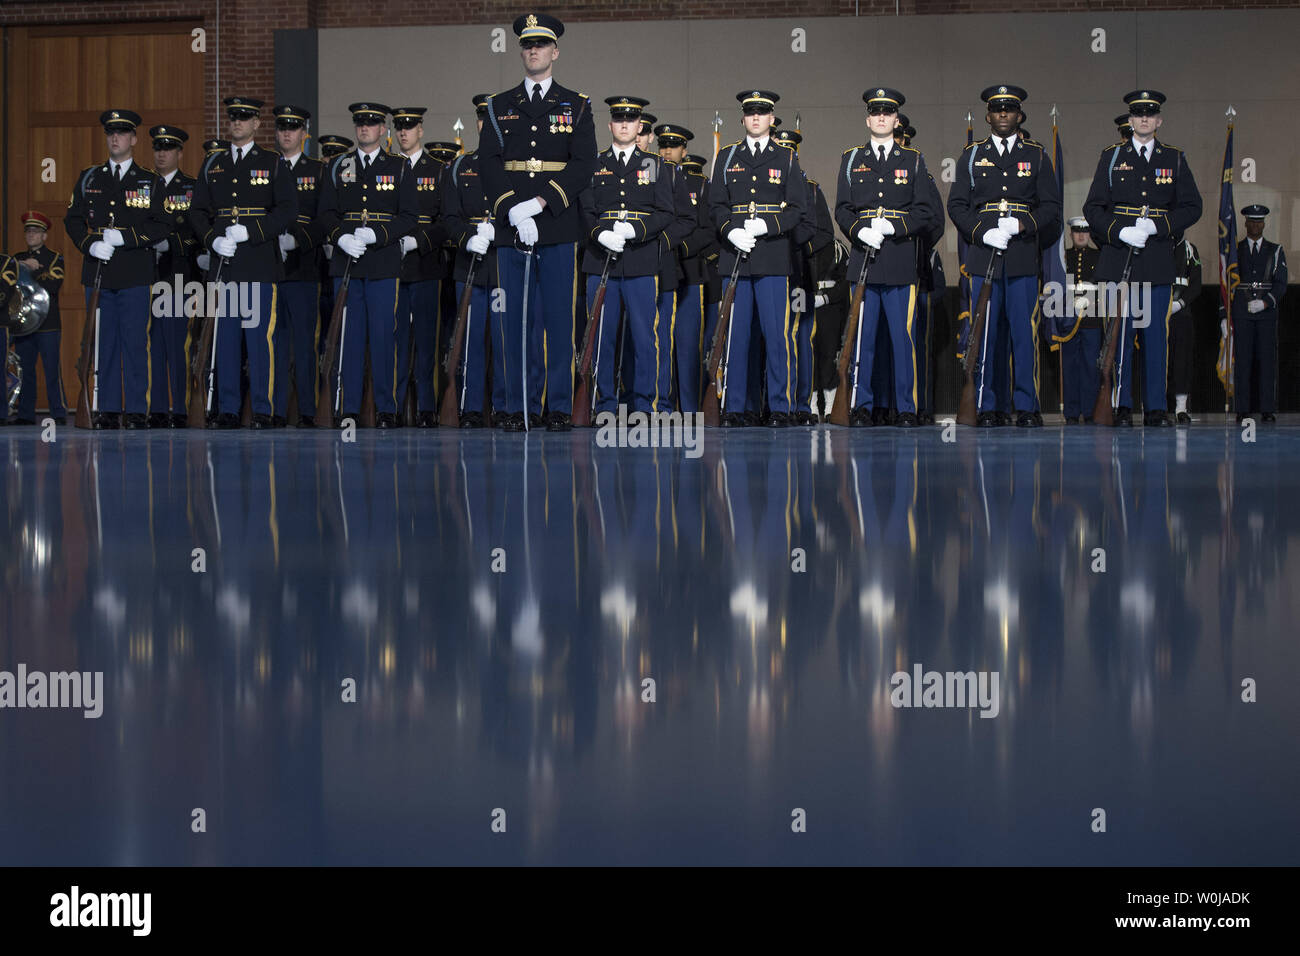 An Army Honor Guard stands for President Barack Obama's Armed Forces Full Honor Review Farewell Ceremony at Joint Base Myers-Henderson Hall, in Virginia on January 4, 2017. The five braces of the military honored the president and vice-president for their service as they conclude their final term in office. Photo by Kevin Dietsch/UPI Stock Photo